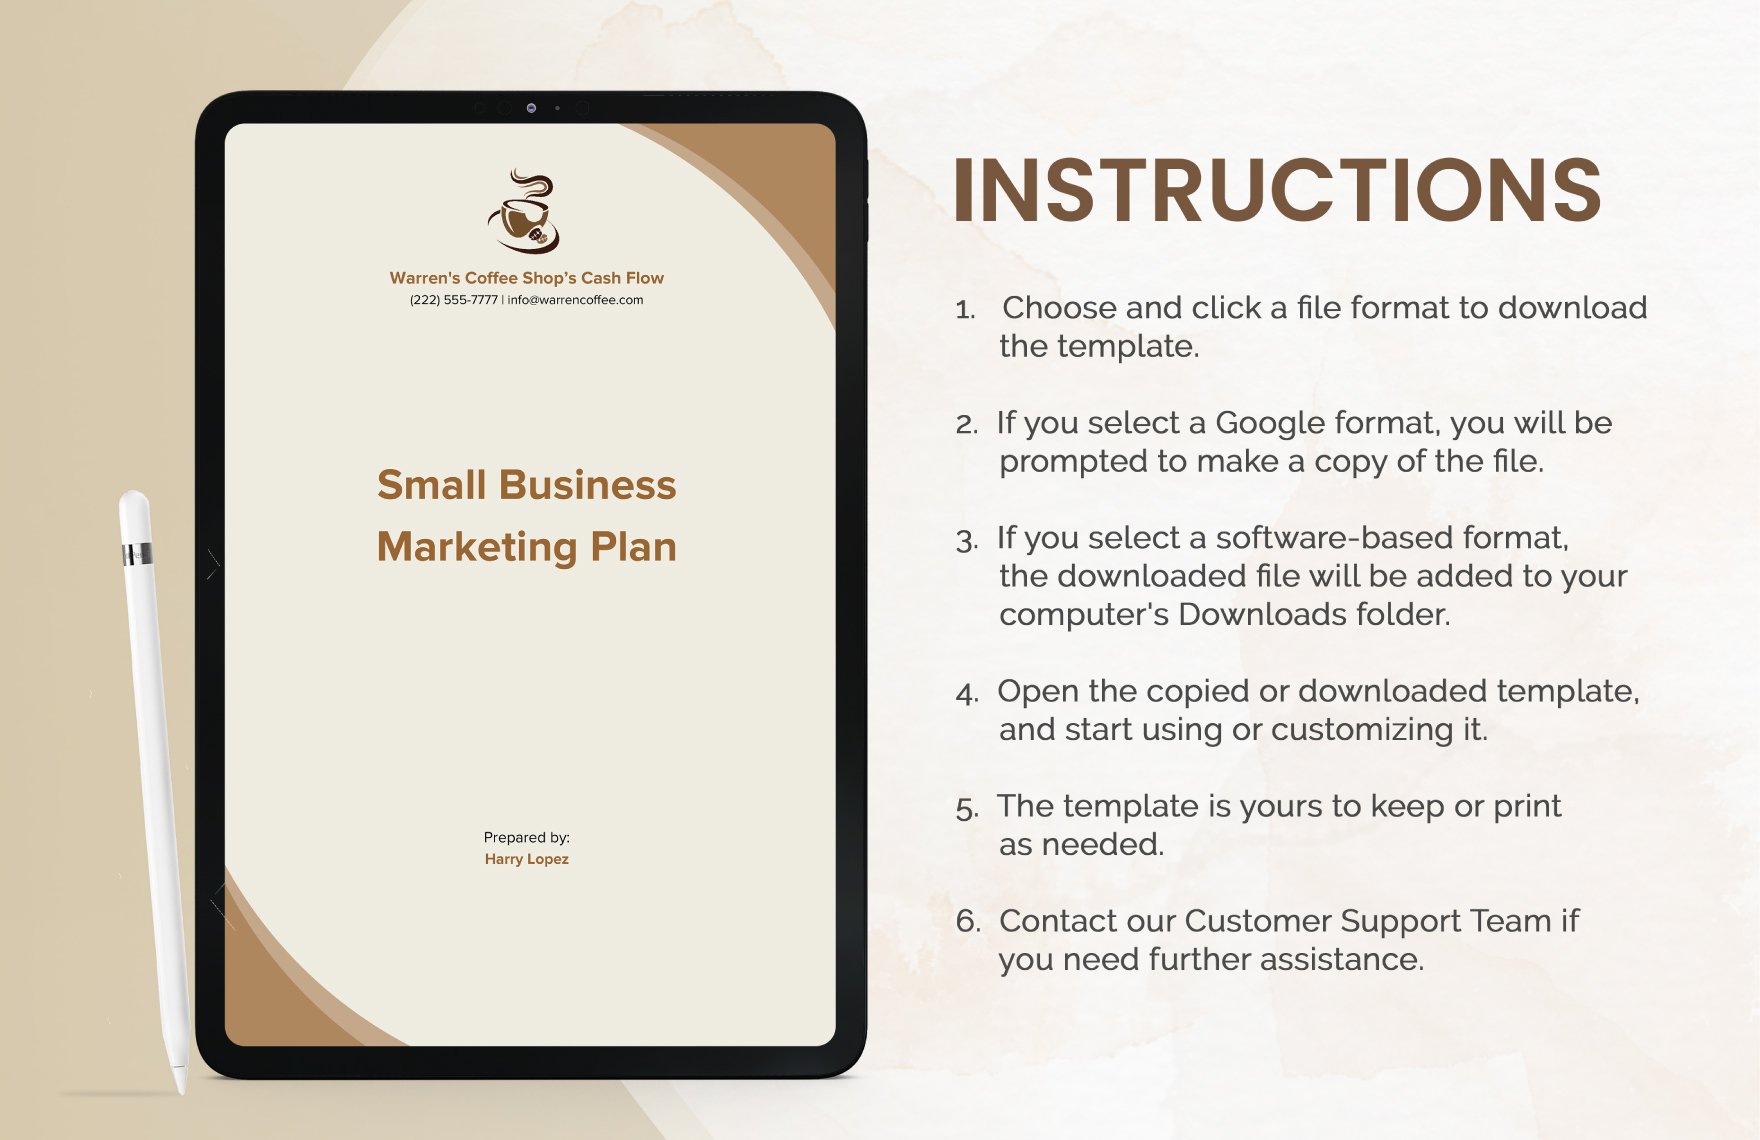 Small Business Marketing Plan Template